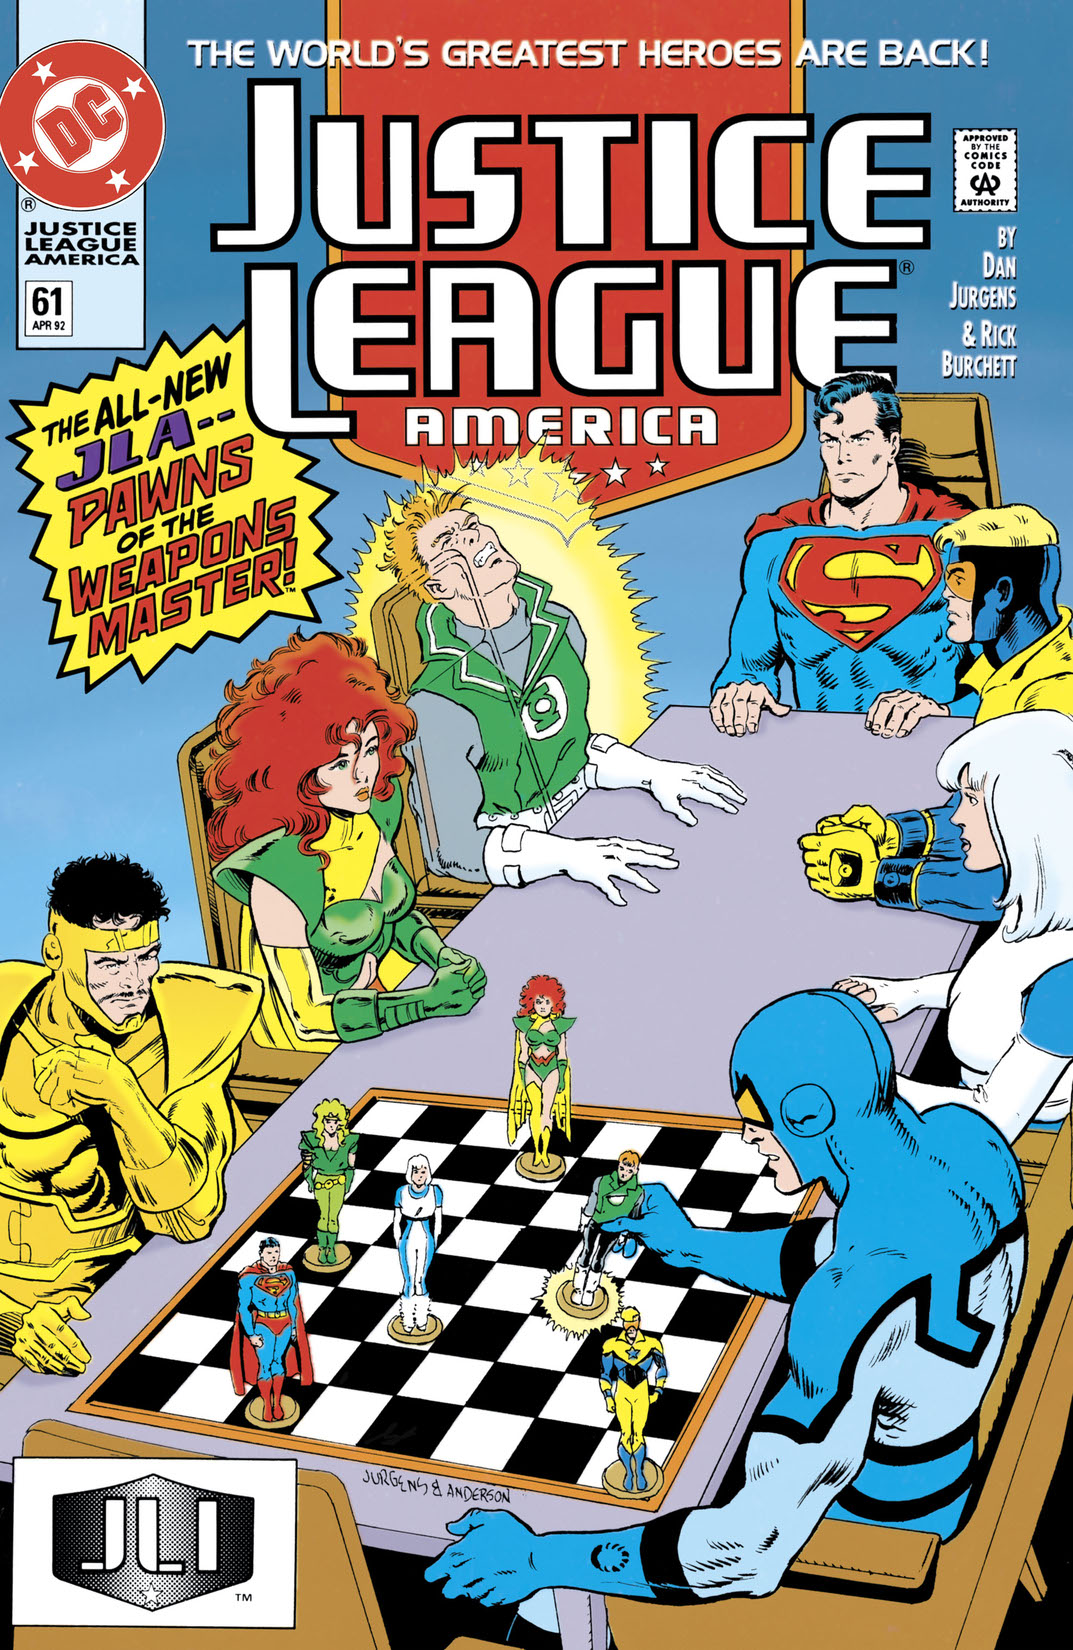 Justice League America (1987-1996) #61 preview images